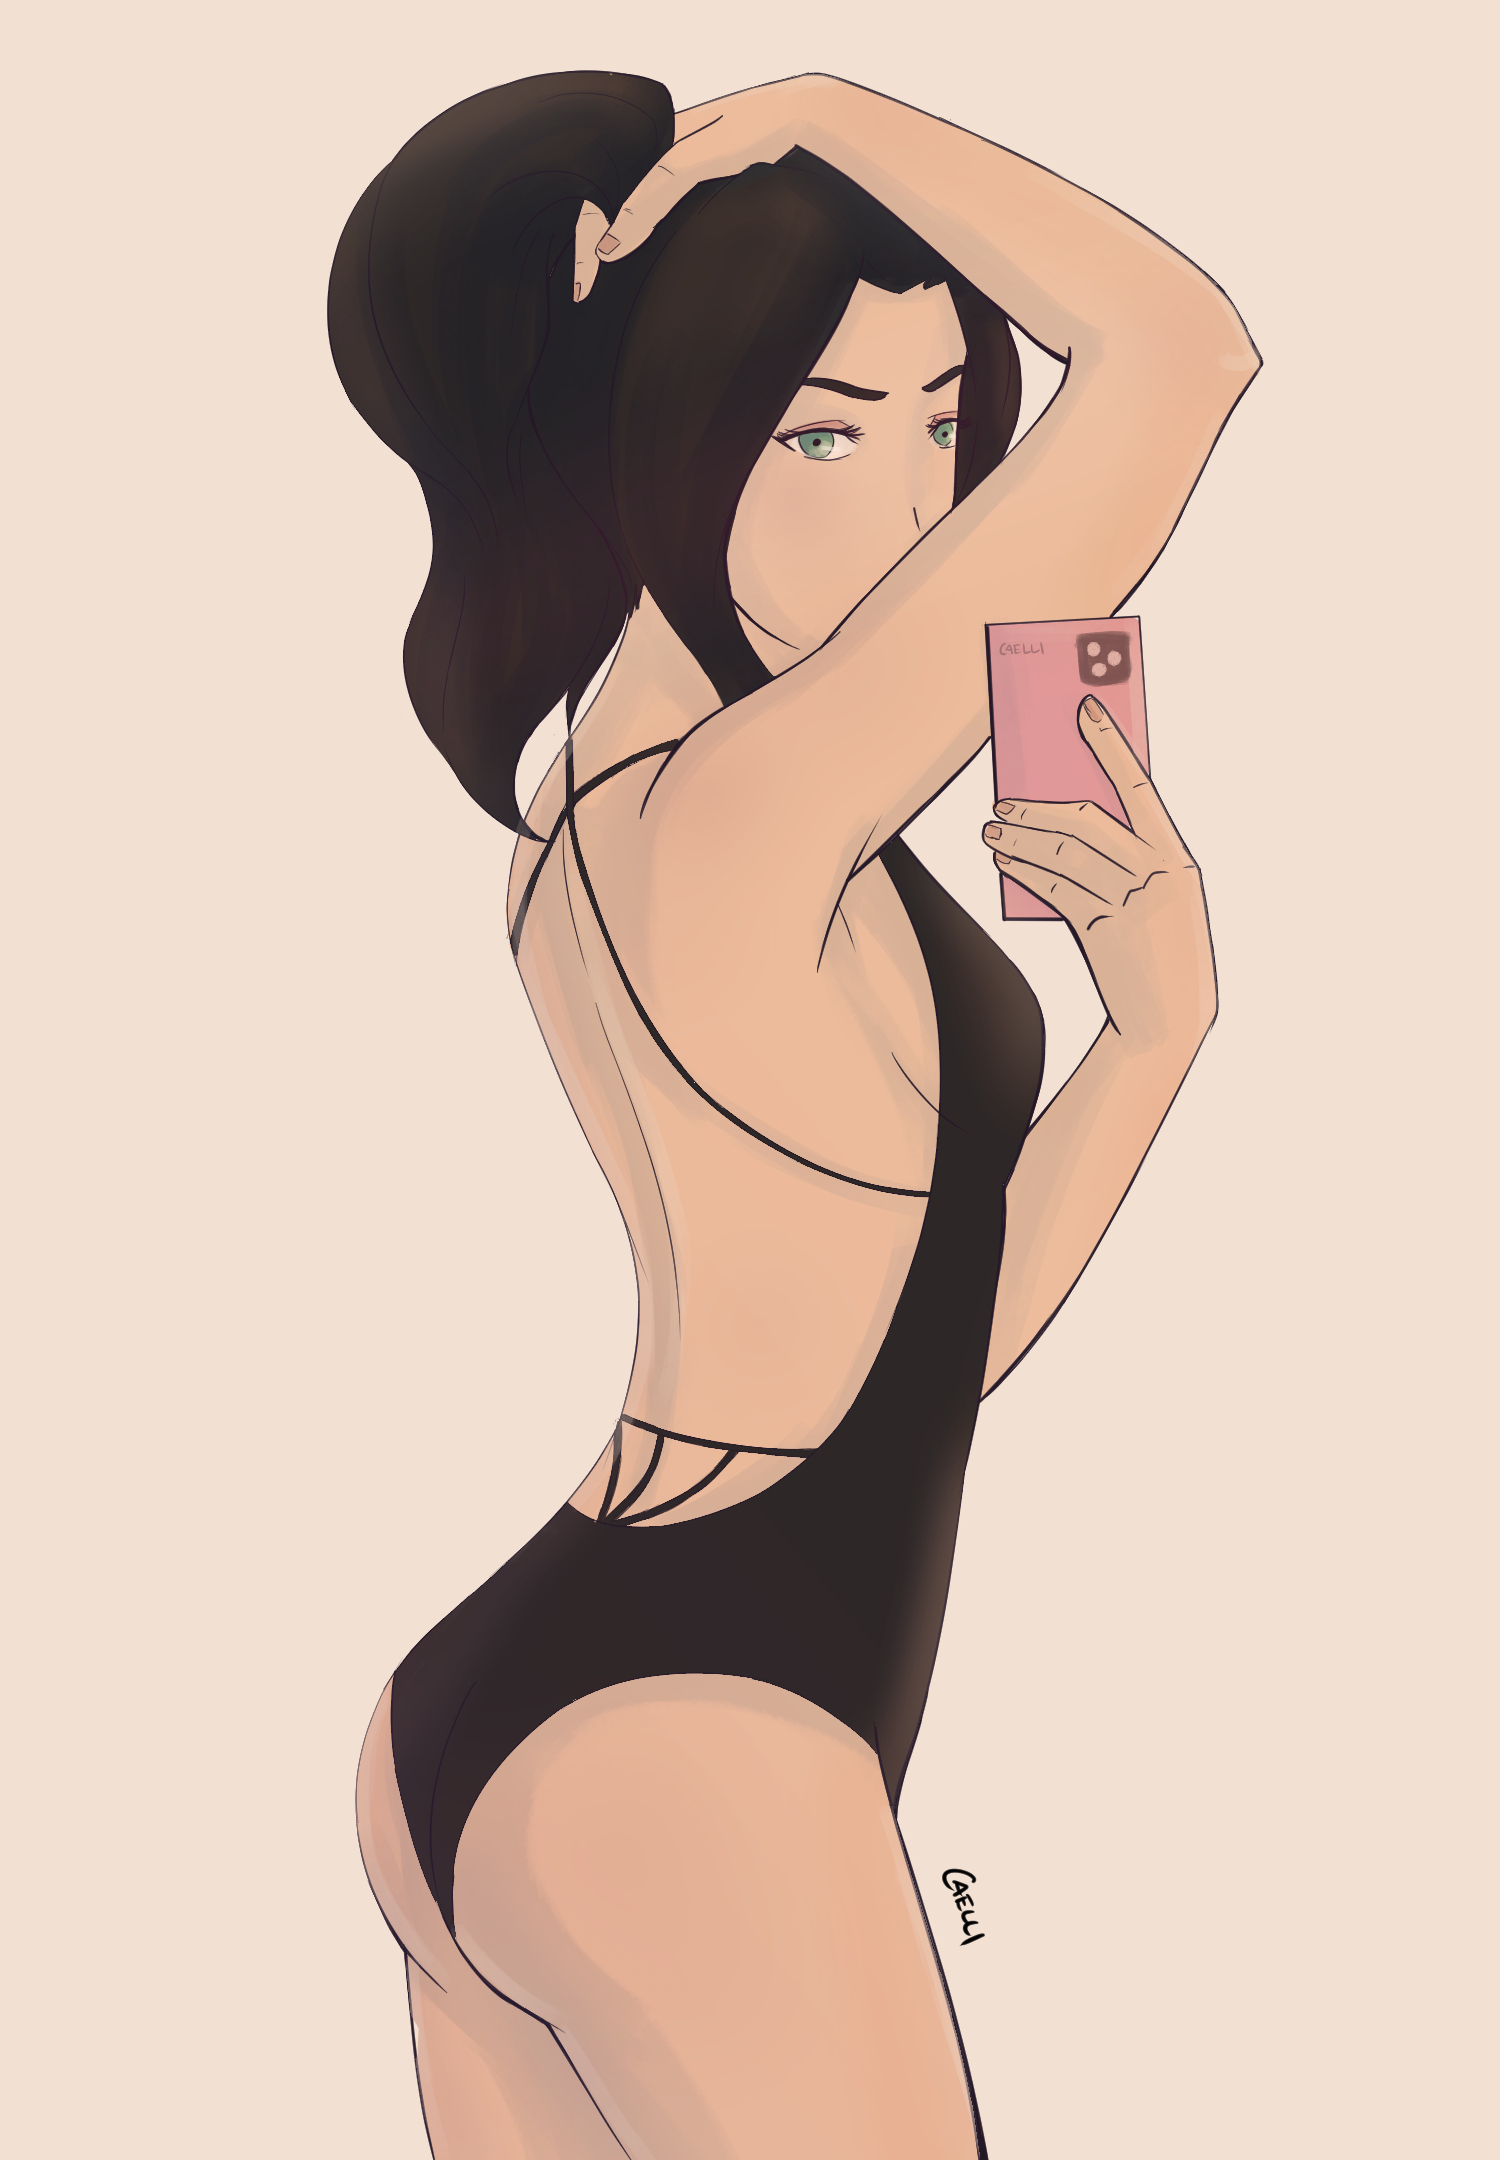 Asami showing off a low back swimsuit.